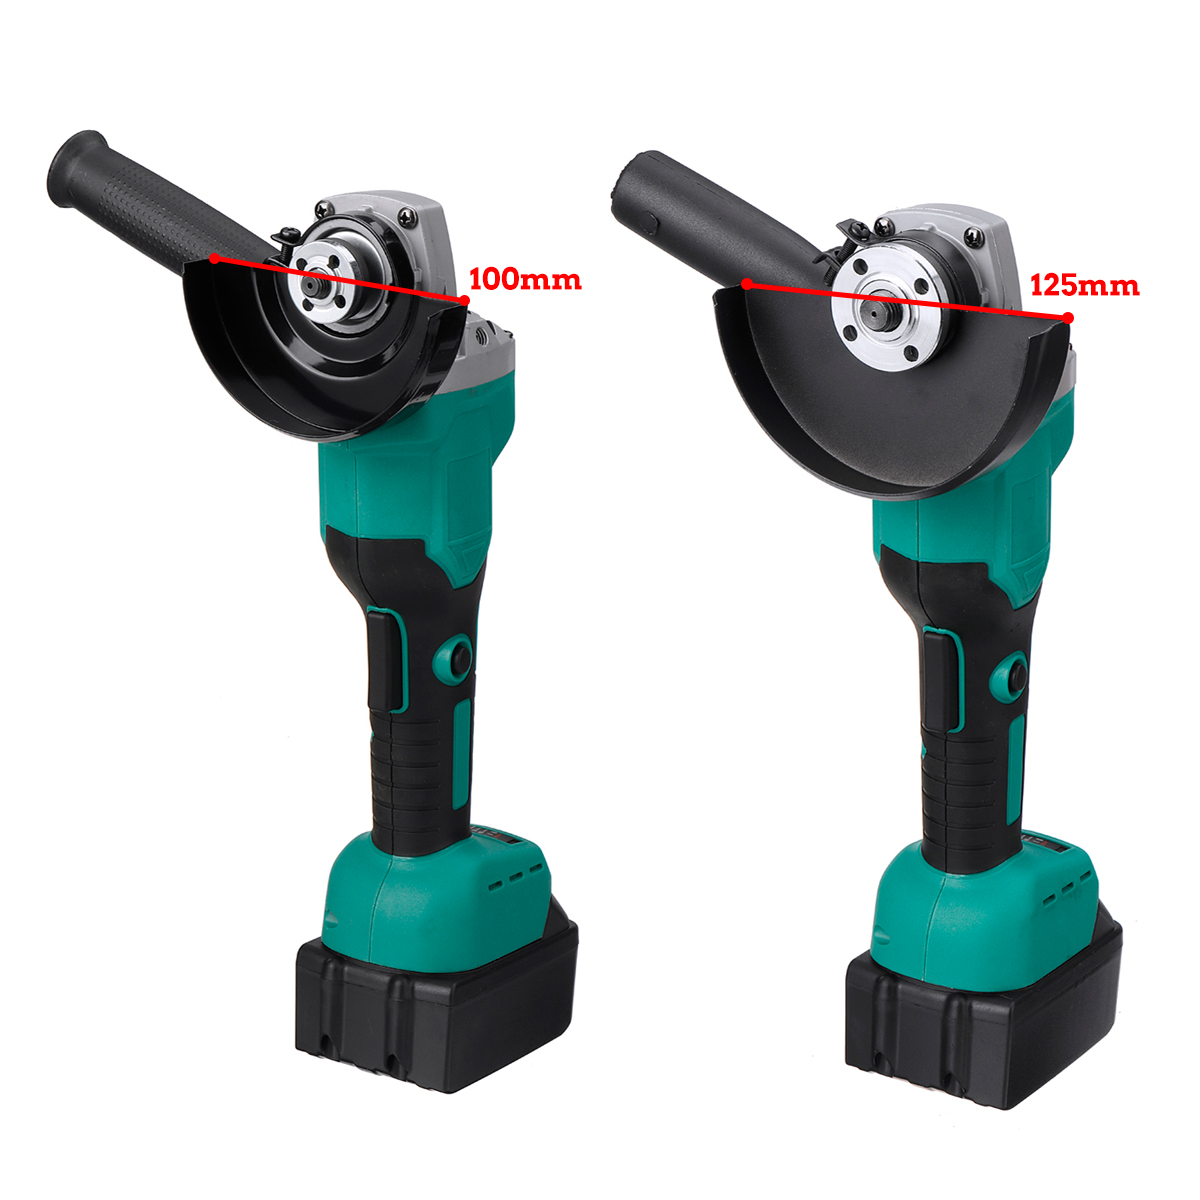 100mm125mm-Brushless-Electric-Angle-Grinder-Polishing-Grinding-Cutting-Tool-W-12-Battery-For-Makita-1861077-9